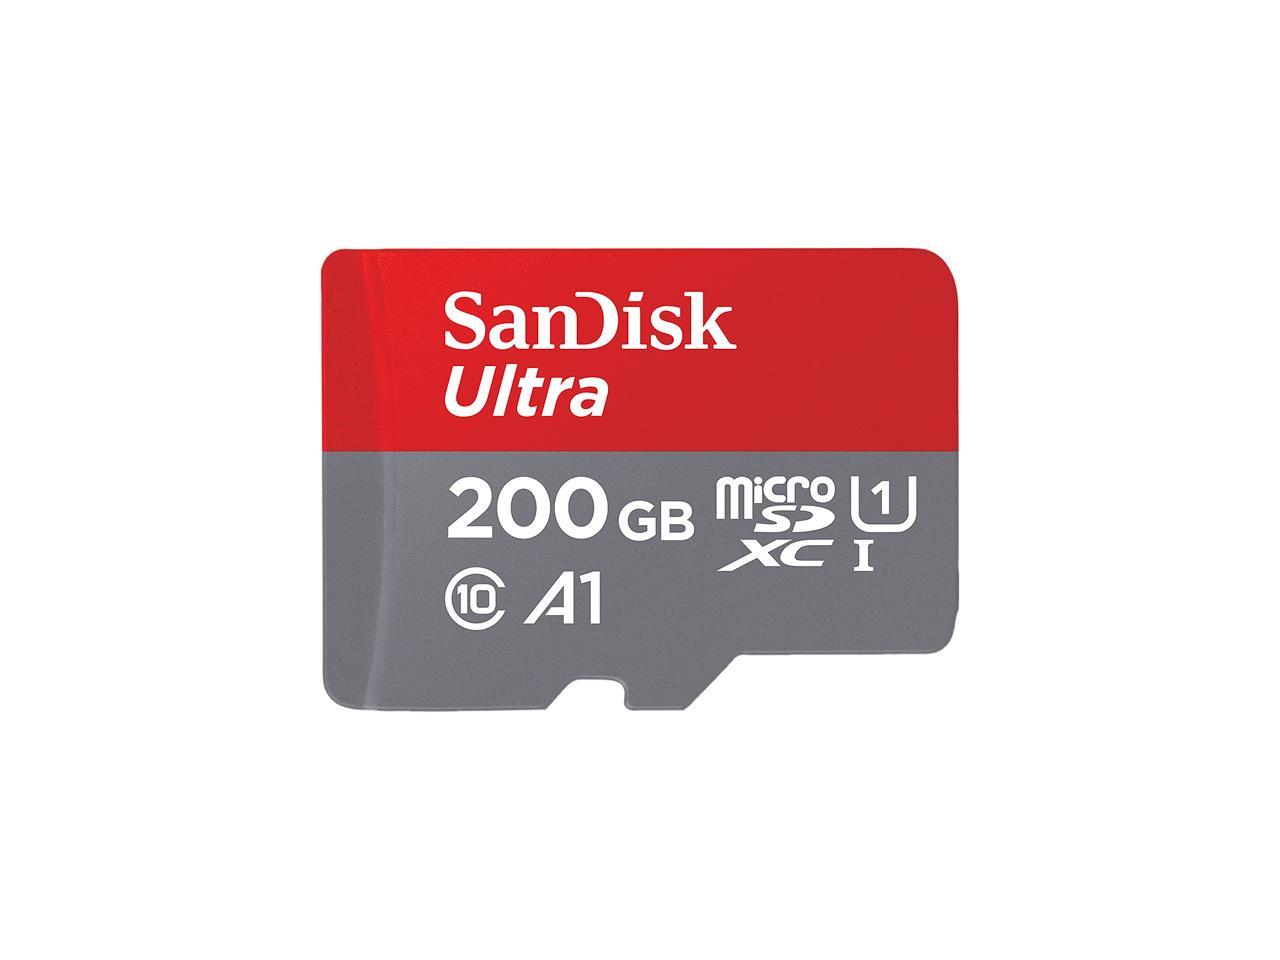 SanDisk Ultra 200GB MicroSDXC Verified for Alcatel 5017D by SanFlash 100MBs A1 U1 C10 Works with SanDisk 